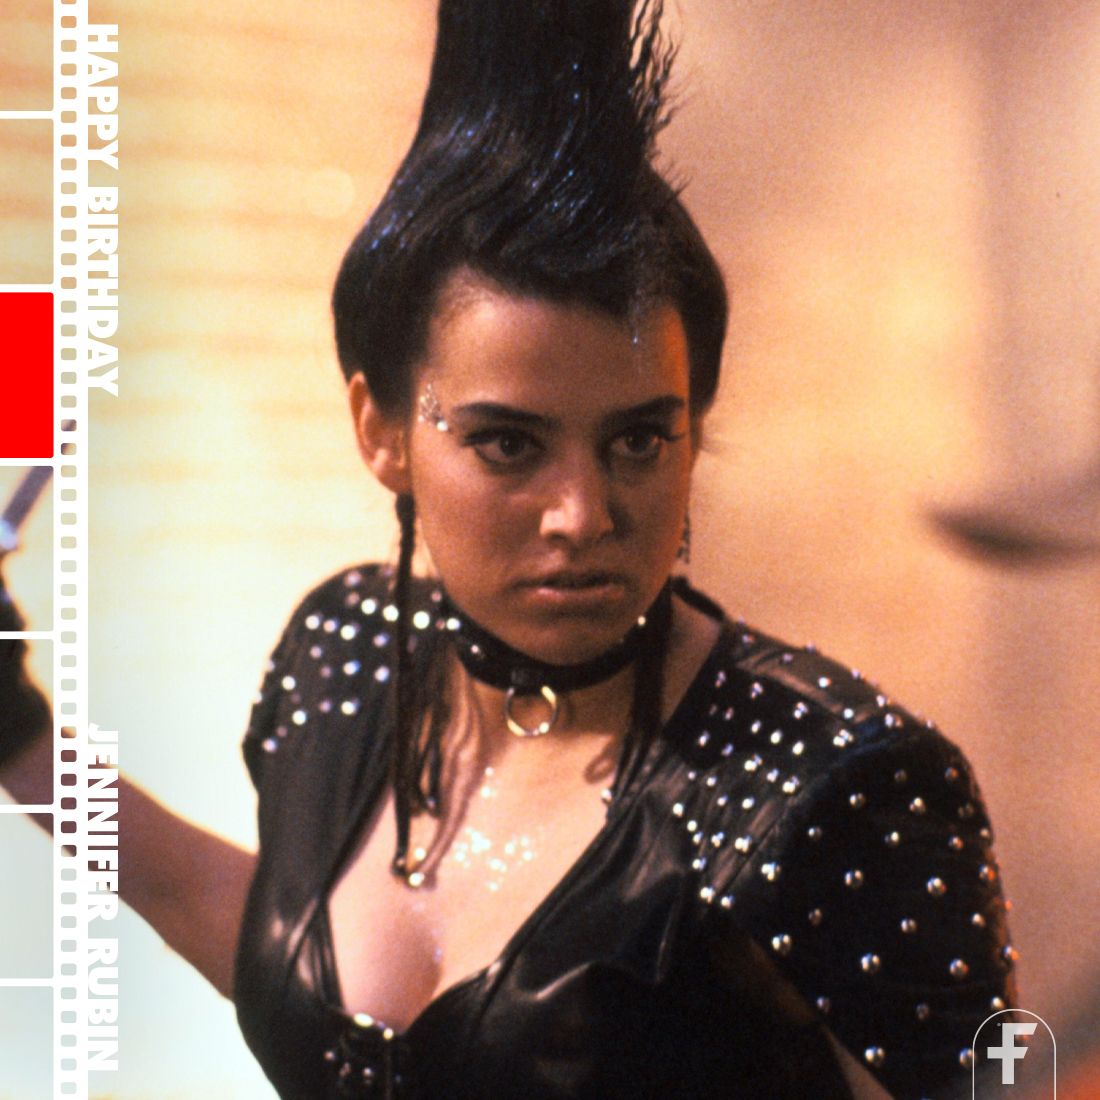 Happy birthday to scream queen Jennifer Rubin! Rubin is known for her work in films A NIGHTMARE ON ELM STREET 3: DREAM WARRIORS, SCREAMERS, TALES FROM THE CRYPT, and THE TWILIGHT ZONE series.